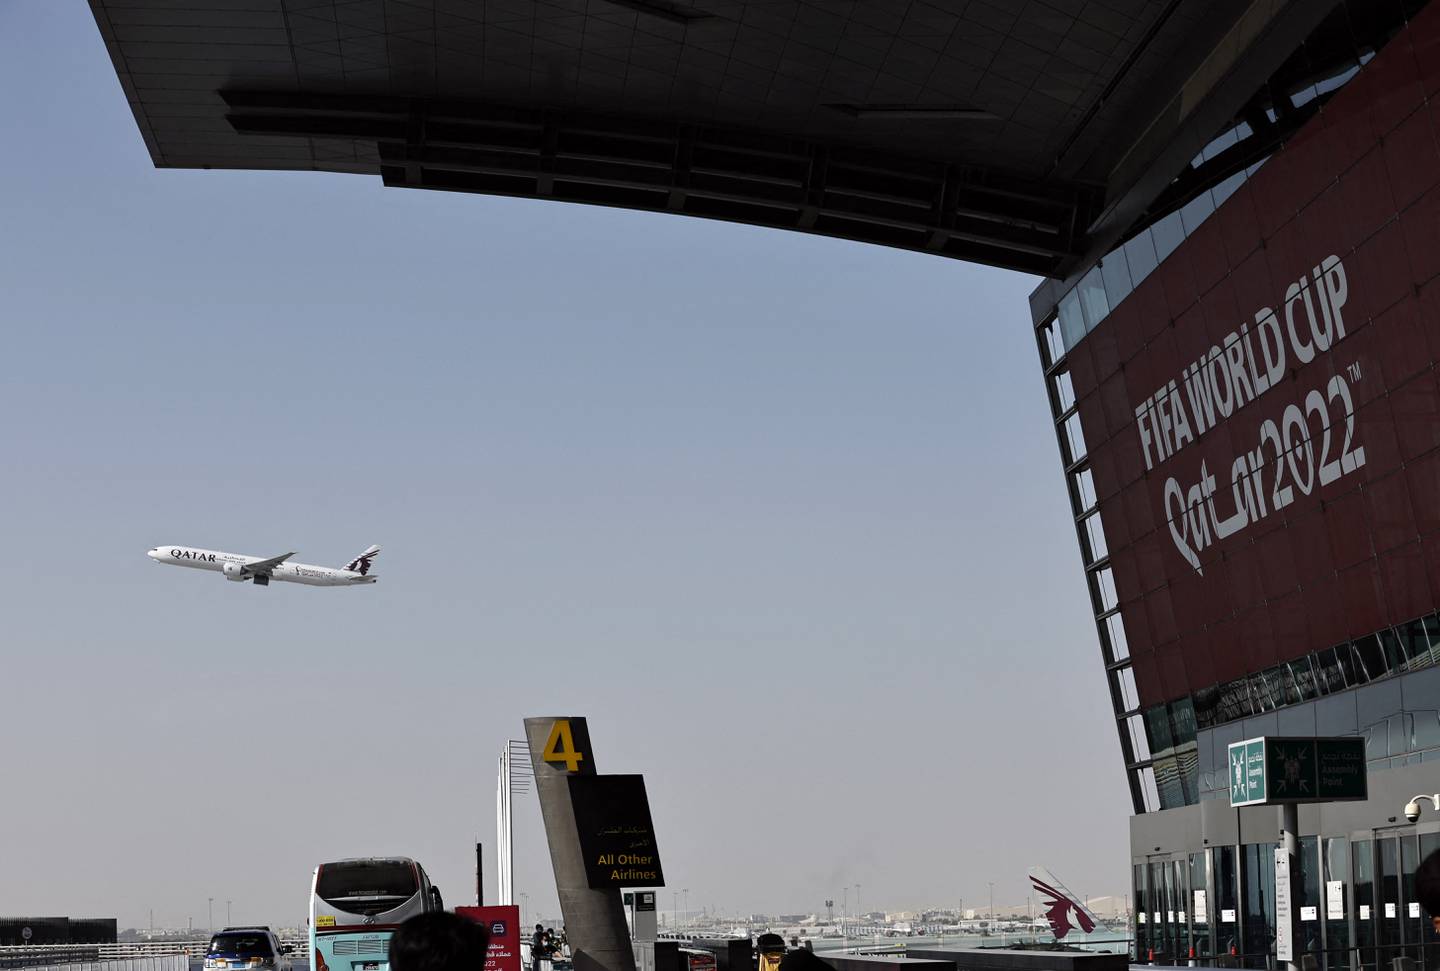 Hamad International Airport in Doha has been gearing up for an influx of World Cup visitors. Reuters